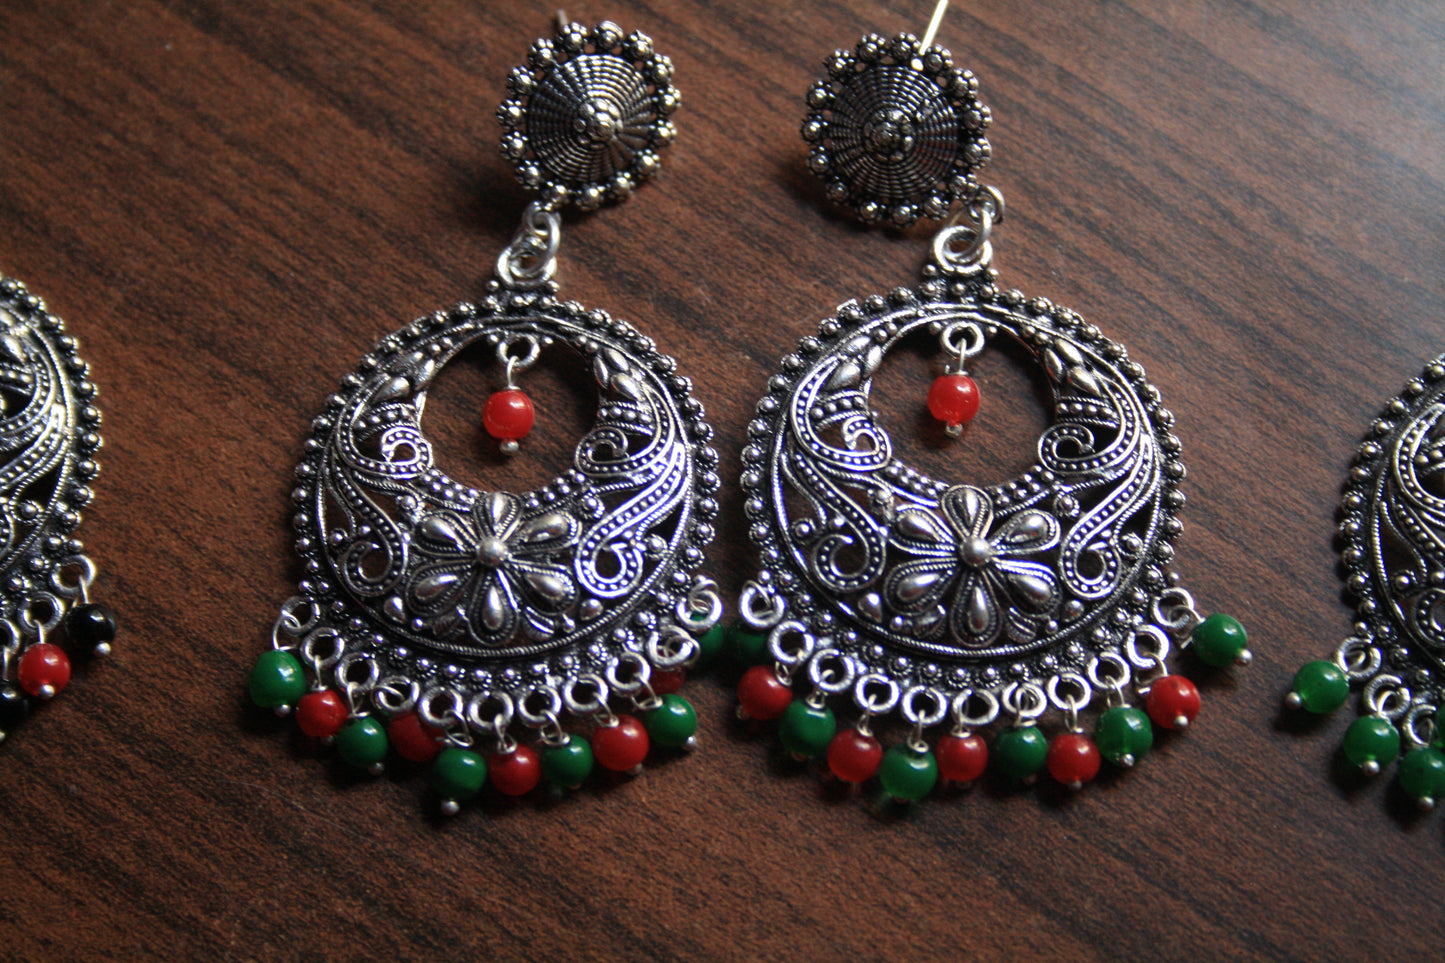 Large Silver Oxidized Boondi Stud Earings with Colored Beads - GlitterGleam